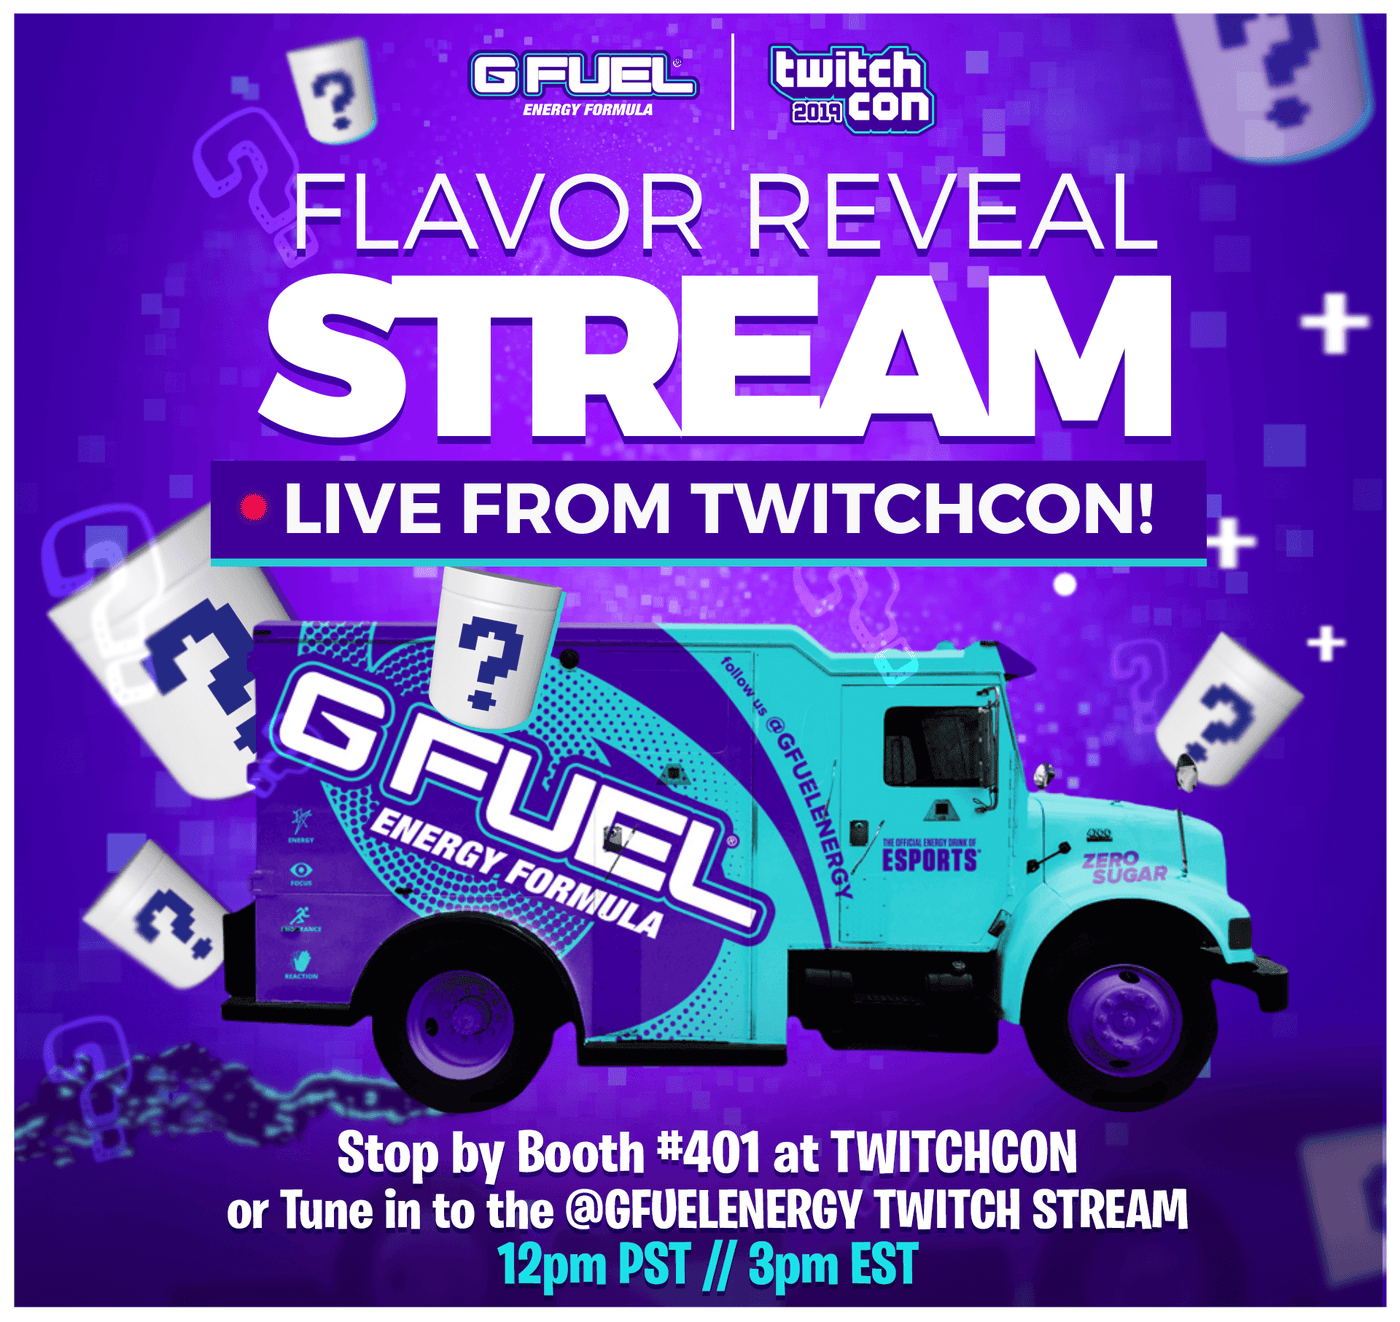 G FUEL will reveal its Twitch-inspired flavor at TwitchCon San Diego on September 27, 2019.